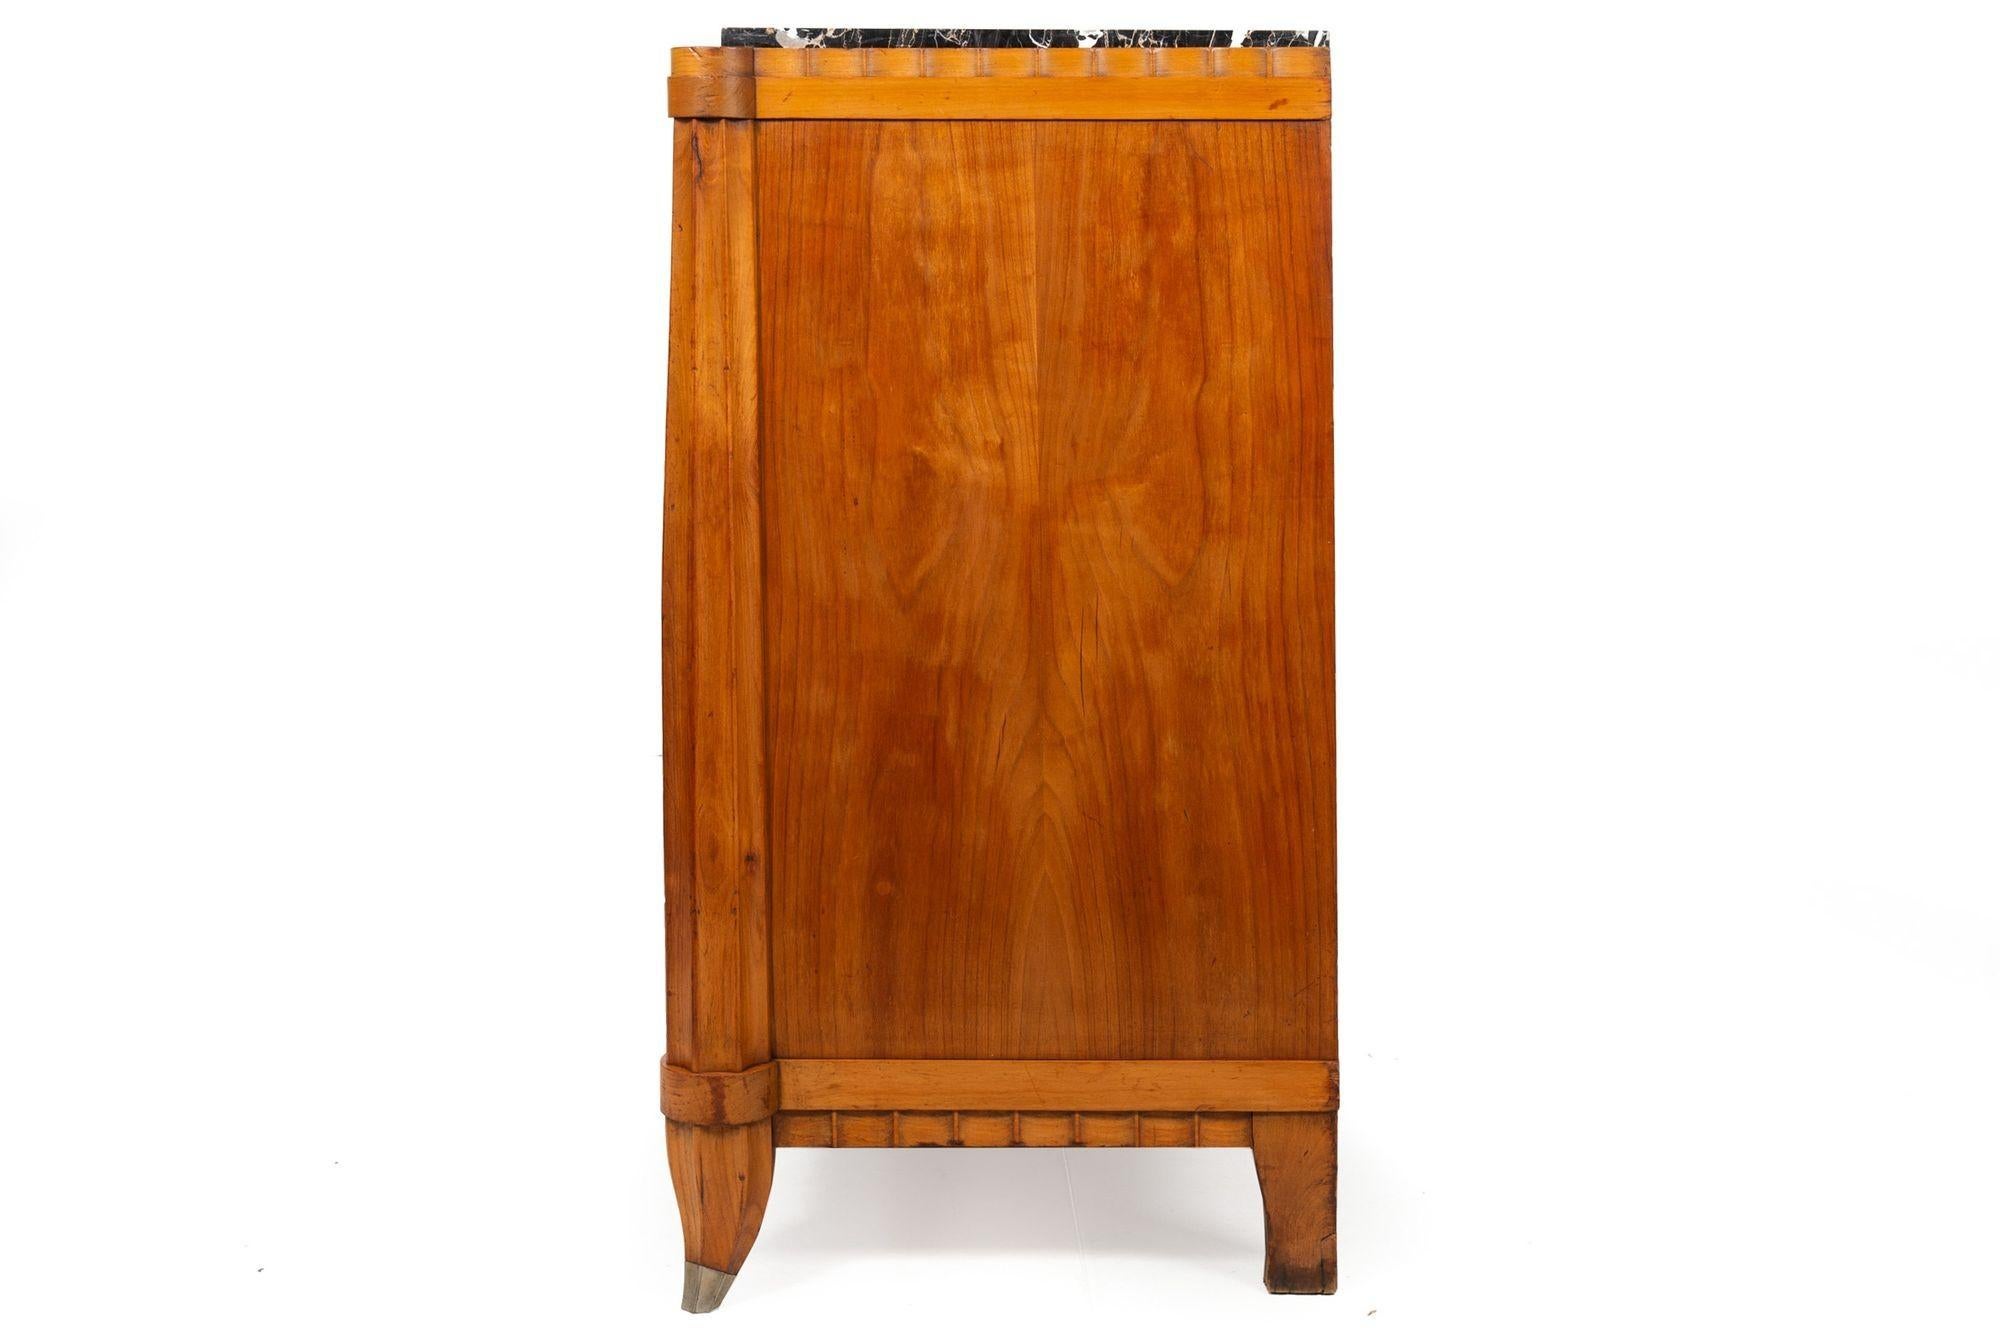 20th Century French Art Deco Cherry, Nickel and Marble Sideboard Credenza Cabinet For Sale